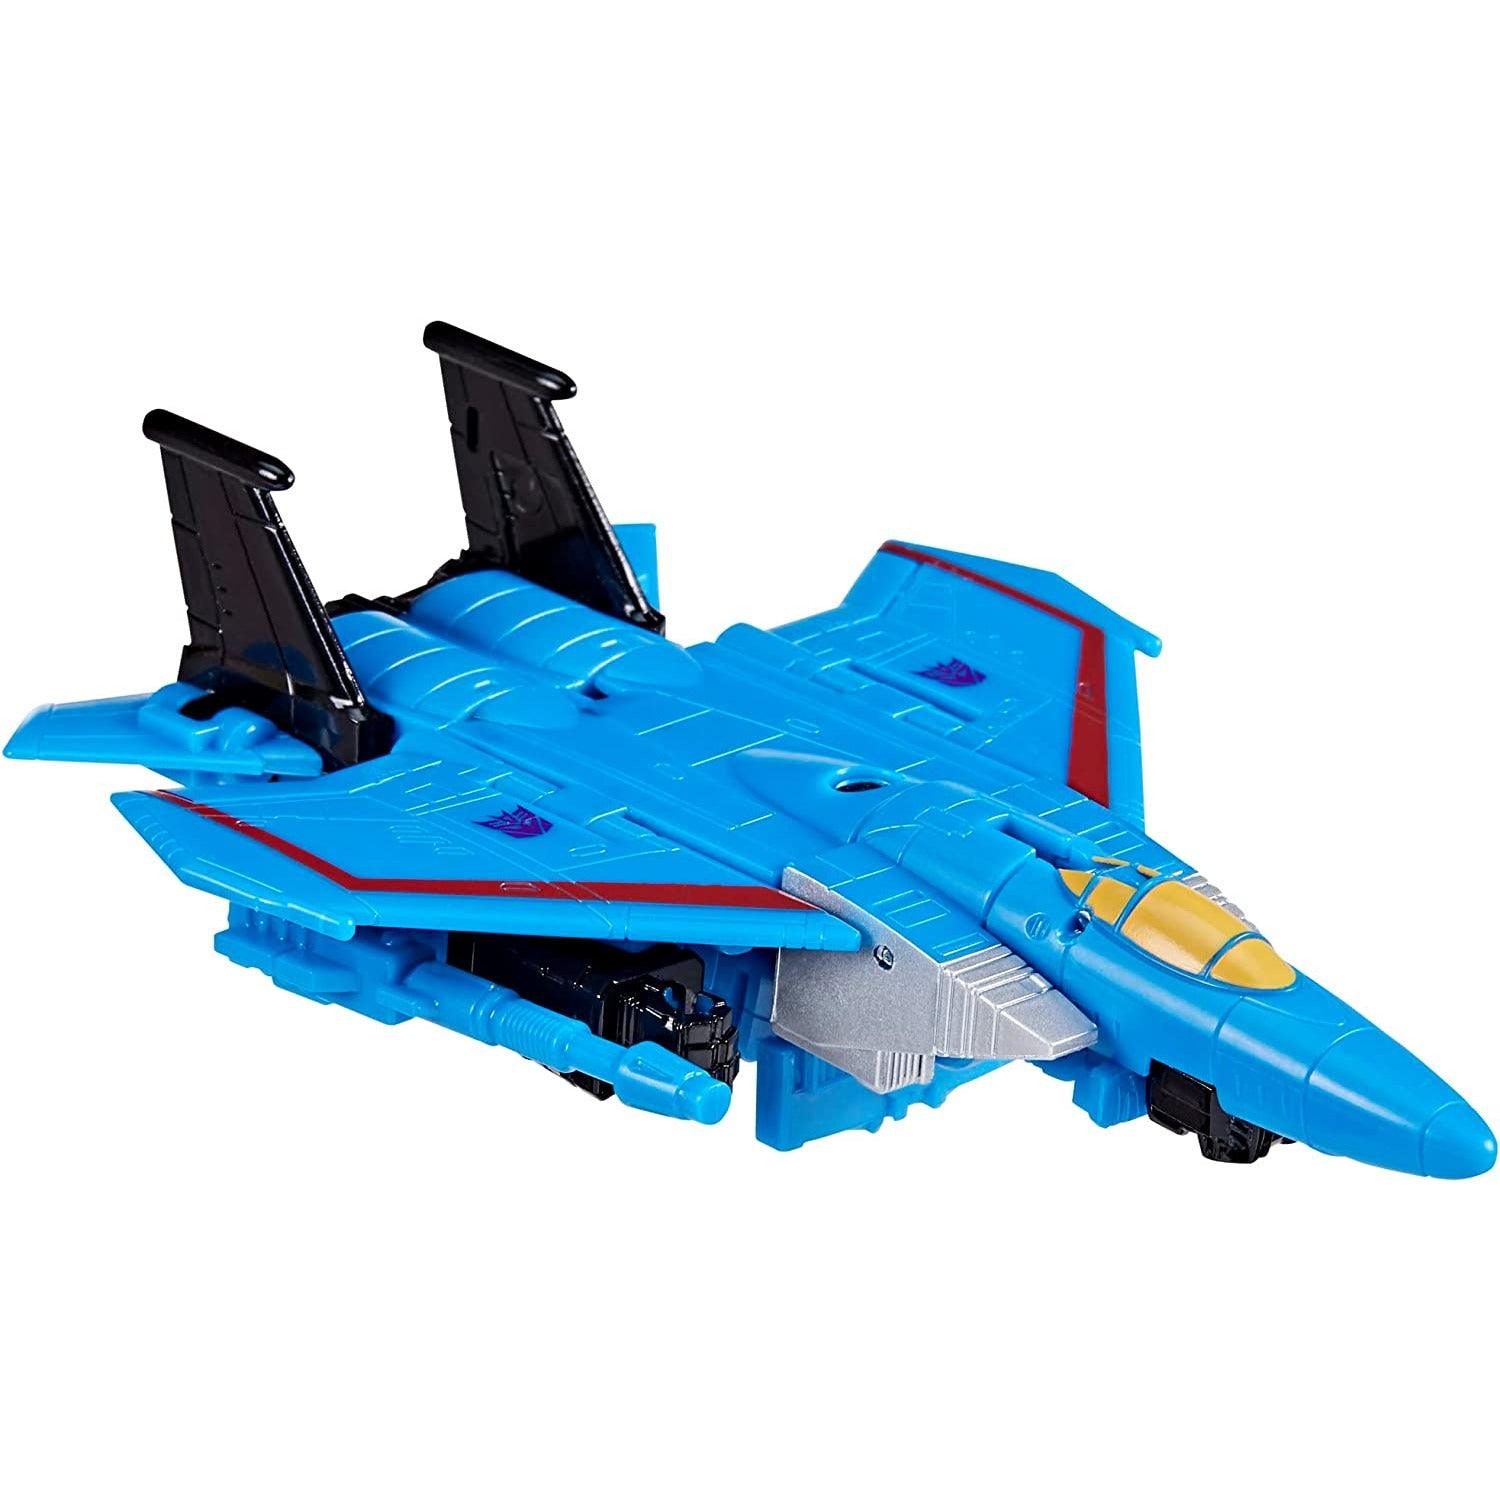 Transformers Toys Legacy Evolution Core Thundercracker Toy, 3.5-inch, Action Figure